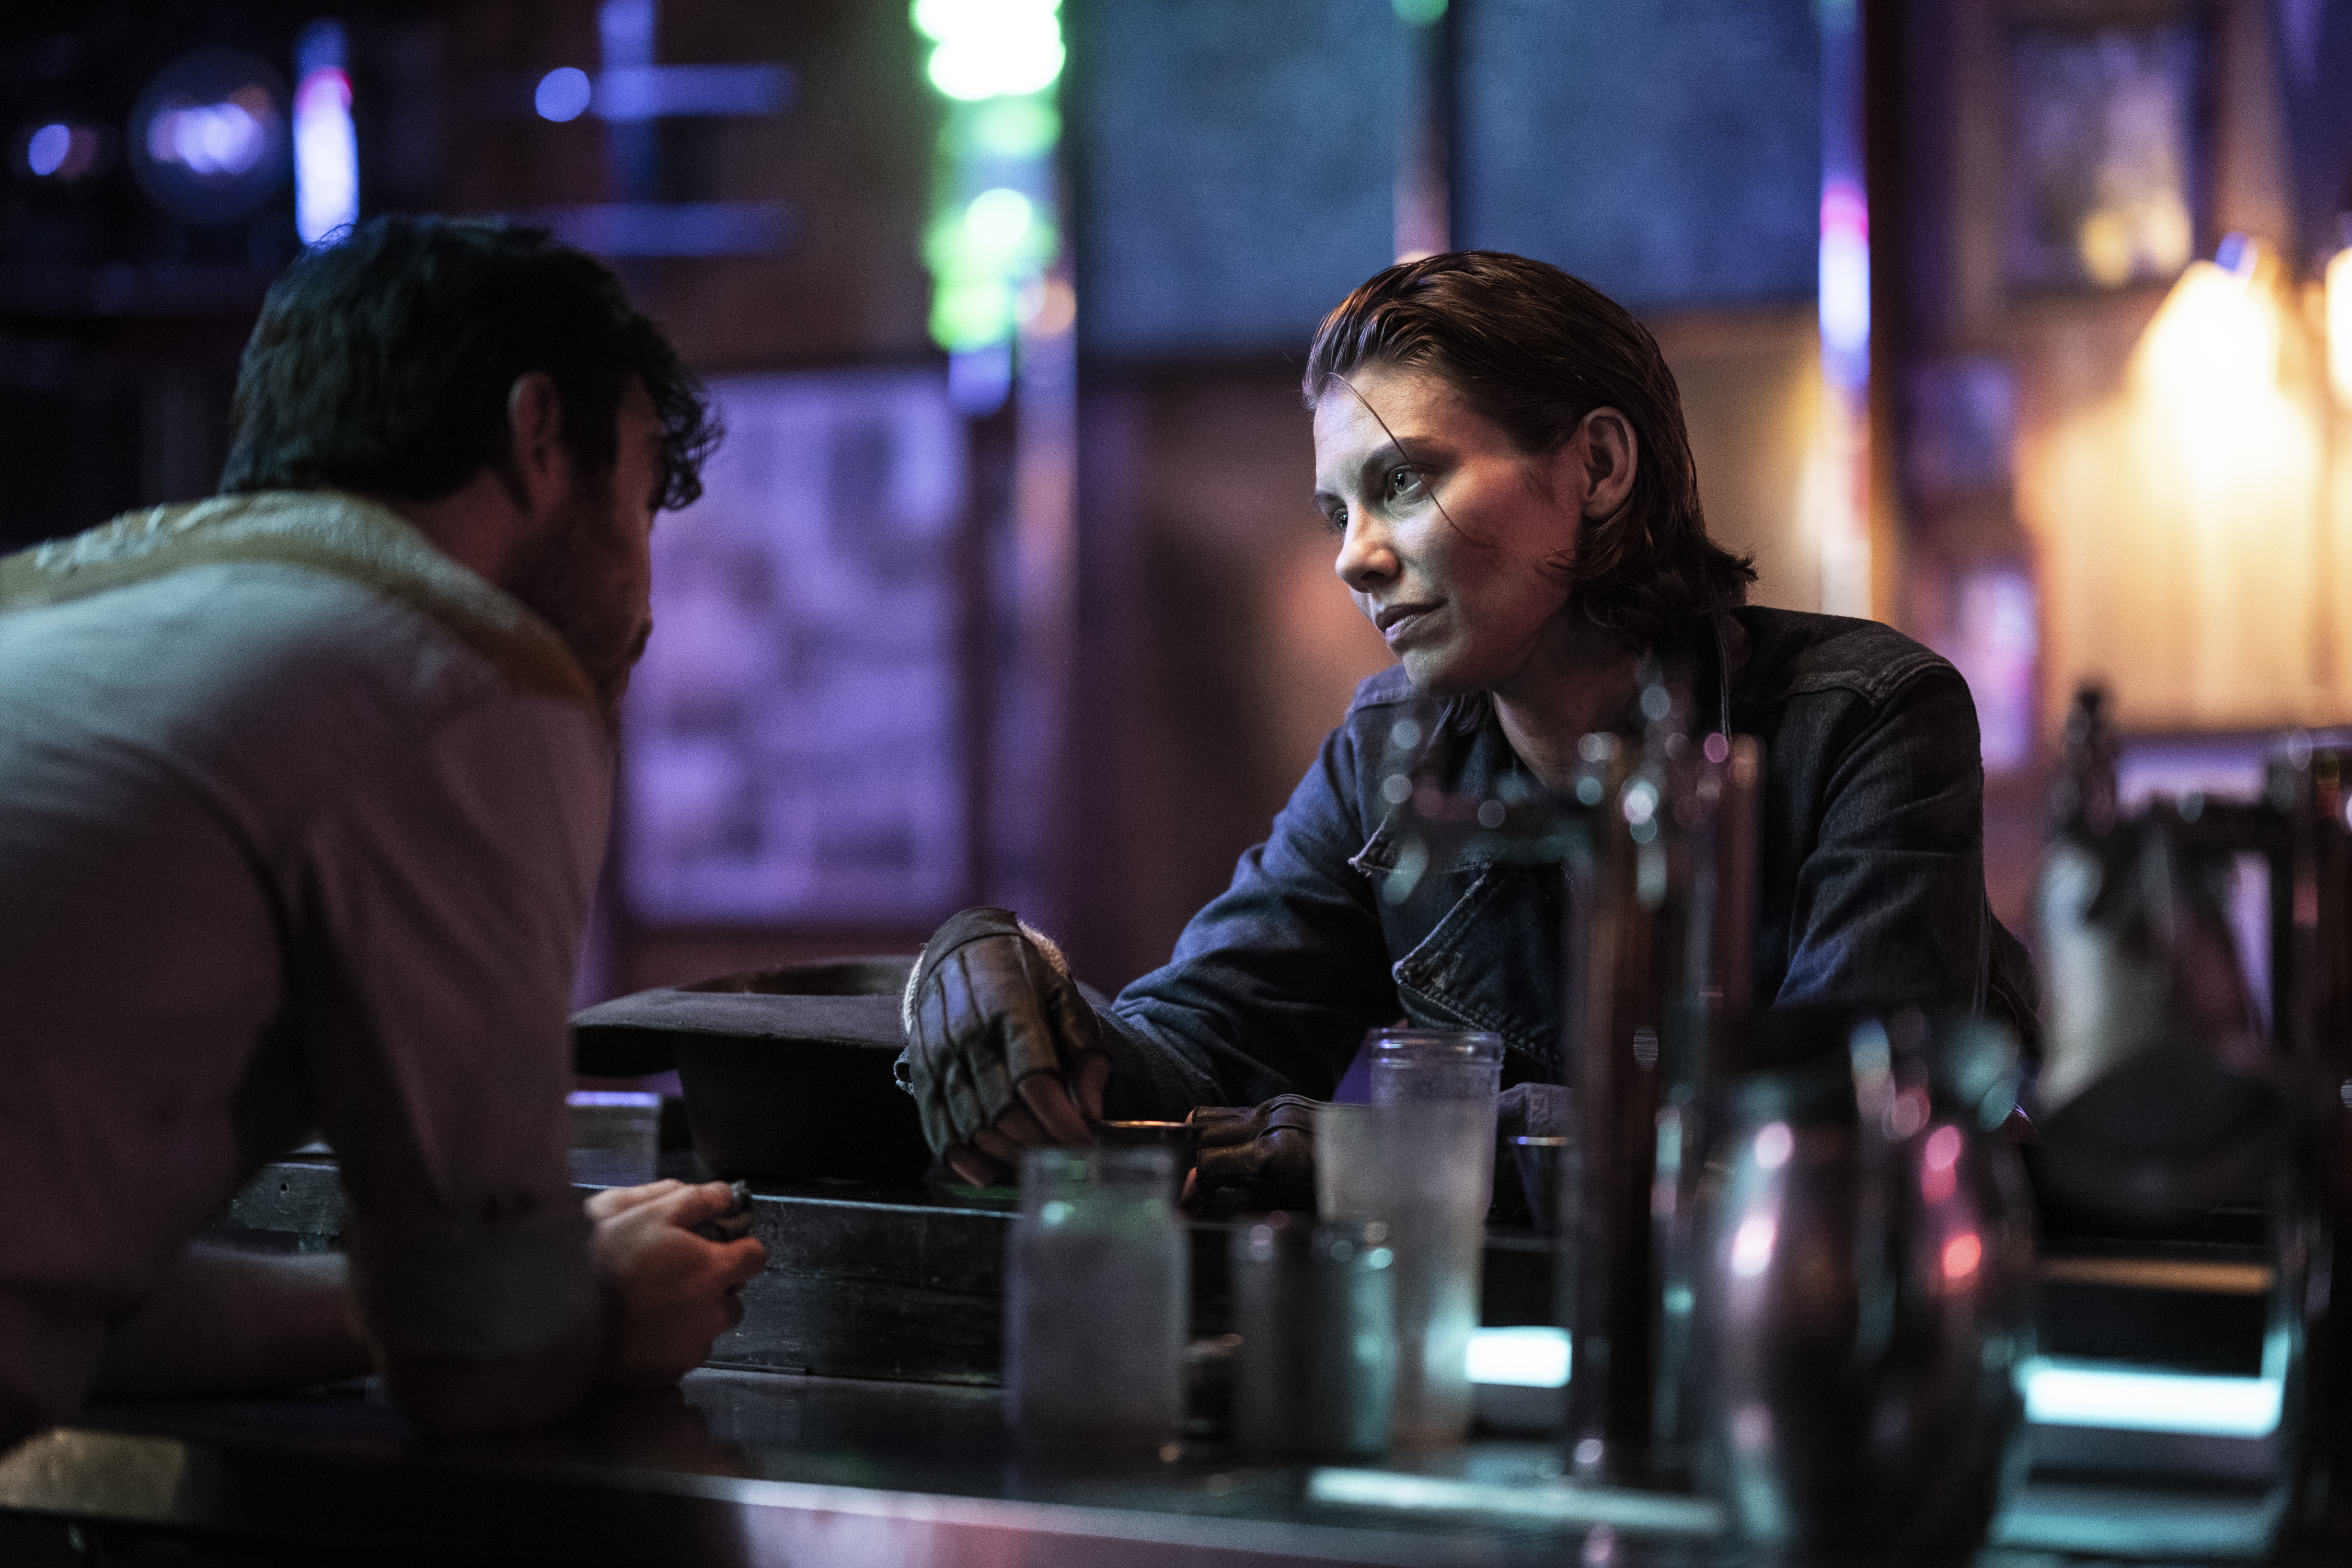 Image of Lauren Cohan as Maggie and Charlie Solis as Bartender in a scene from AMC's 'The Walking Dead: Dead City.' The Bartender, a white man with short, black hair and a beard and wearing a white, 3/4 sleeved button-down shirt has his back to the camera as he leans on the bar. Maggie is a white woman who is facing him as she sits at the bar, her short, chin-length brown hair slicked back with a tendril falling in her face. She's wearing a dark, long-sleeved shirt under a brown, leather vest, and black, fingerless gloves. She's listening intently to the Bartender as he speaks. 